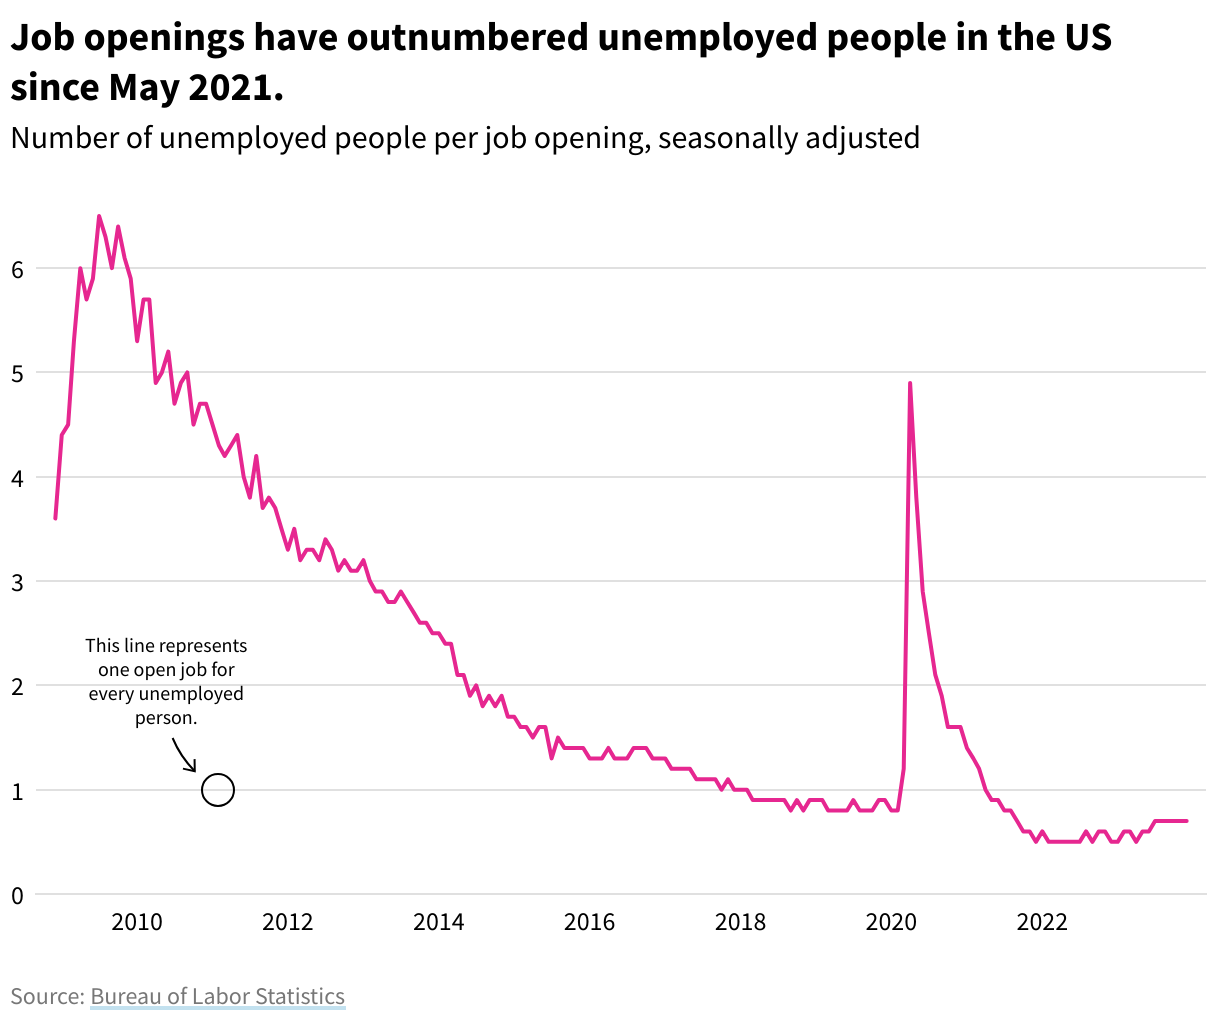 A line chart showing the seasonally-adjusted number of unemployed people per job opening in the US. The line has been below 1 since May 2021.